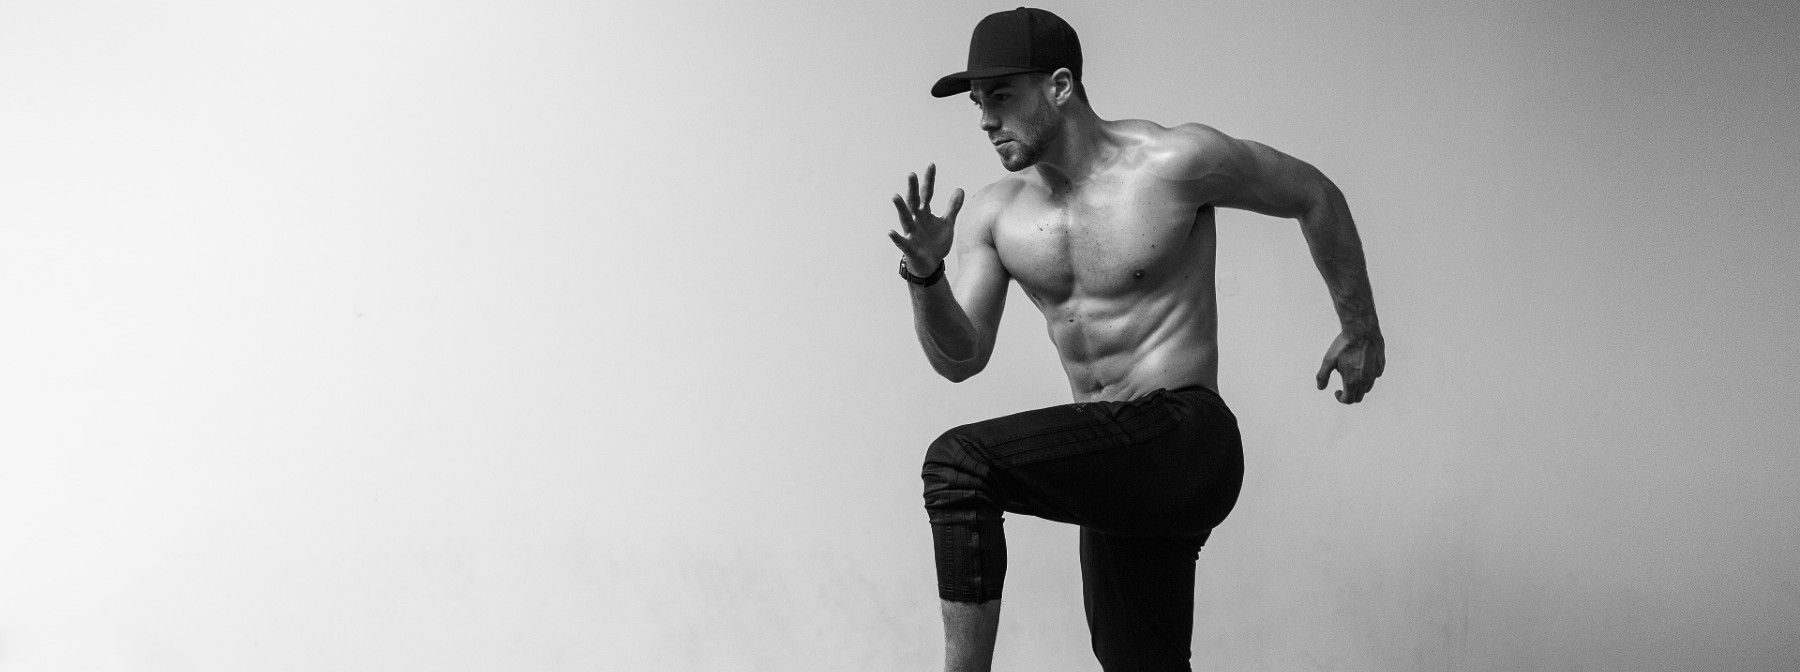 Can You Handle This Full-Body Kettlebell Workout From Bradley Simmonds?